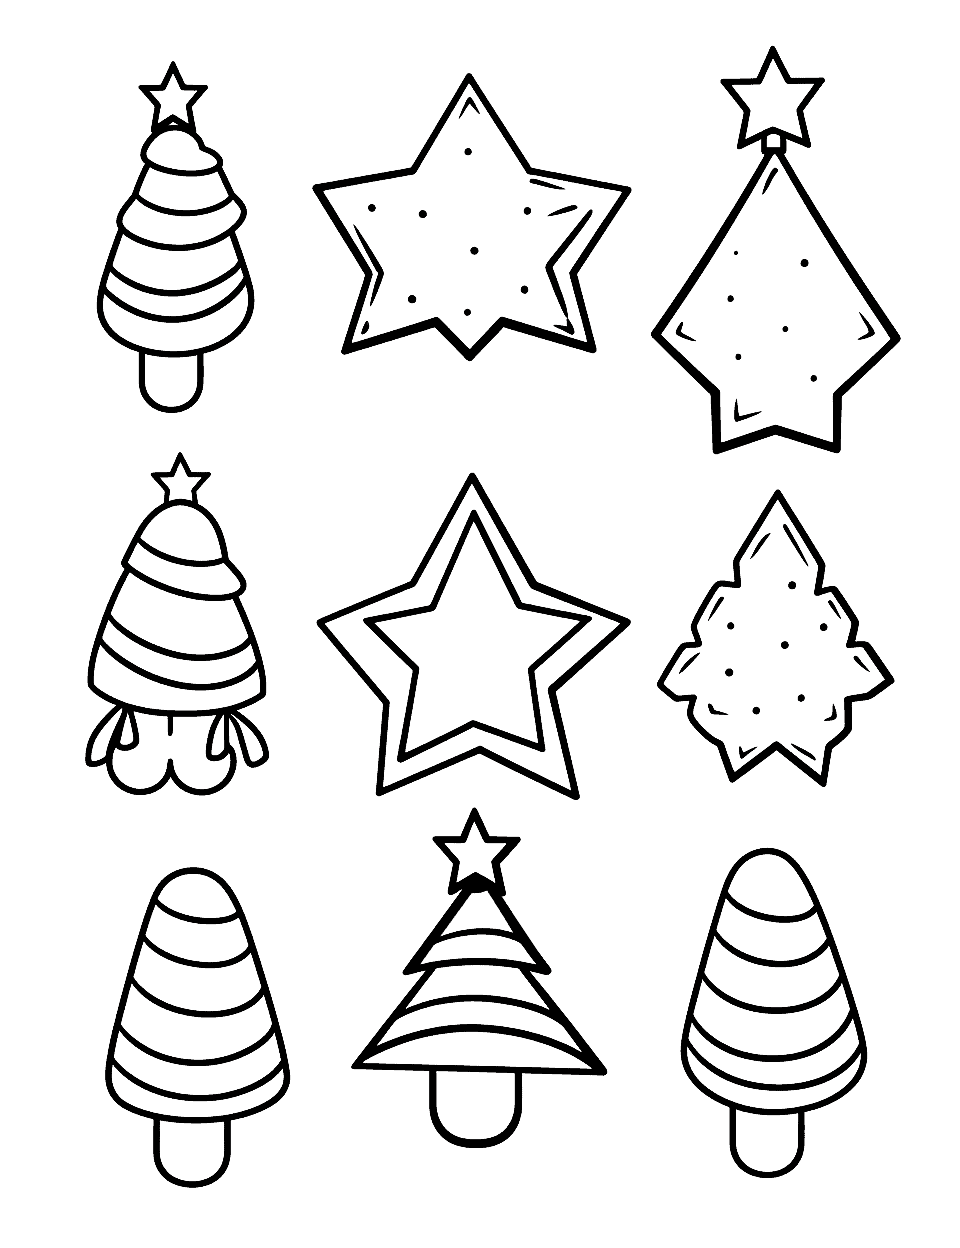 Preschool Christmas Shapes Coloring Page - Basic Christmas-themed shapes like stars, trees, and bells for preschoolers to color in.